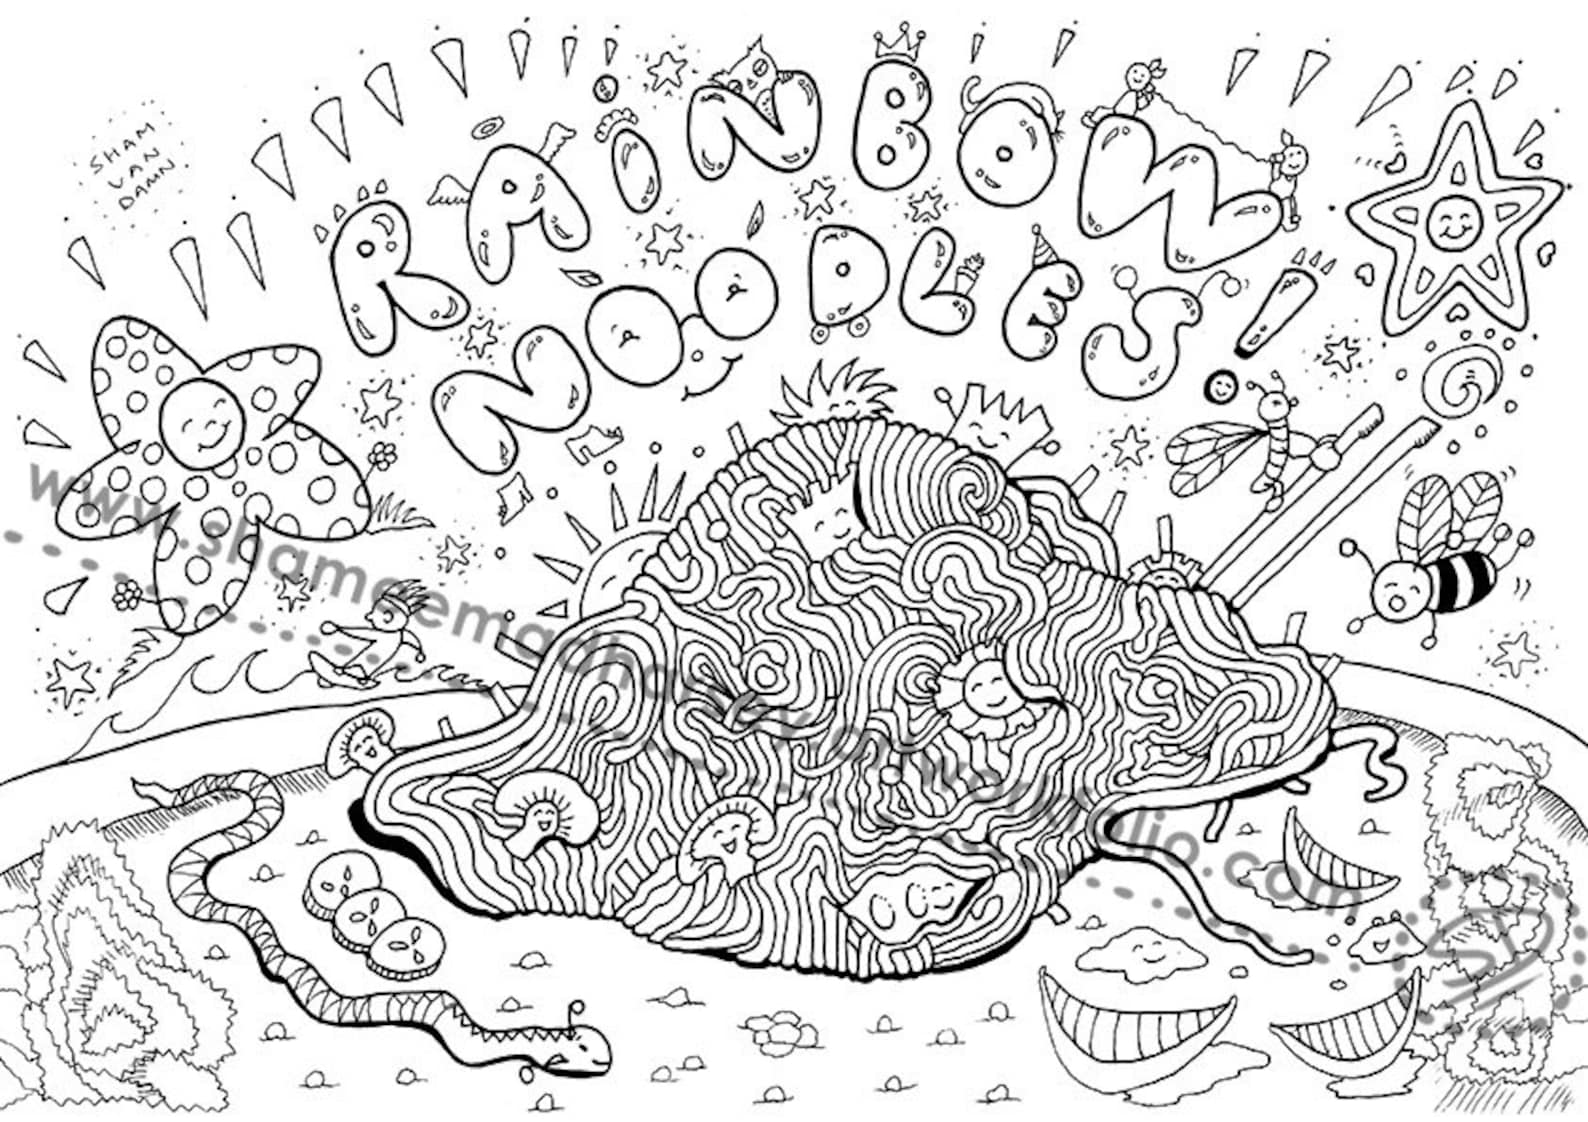 Rainbow Noodles Coloring Page Adult Coloring Page Art - Etsy